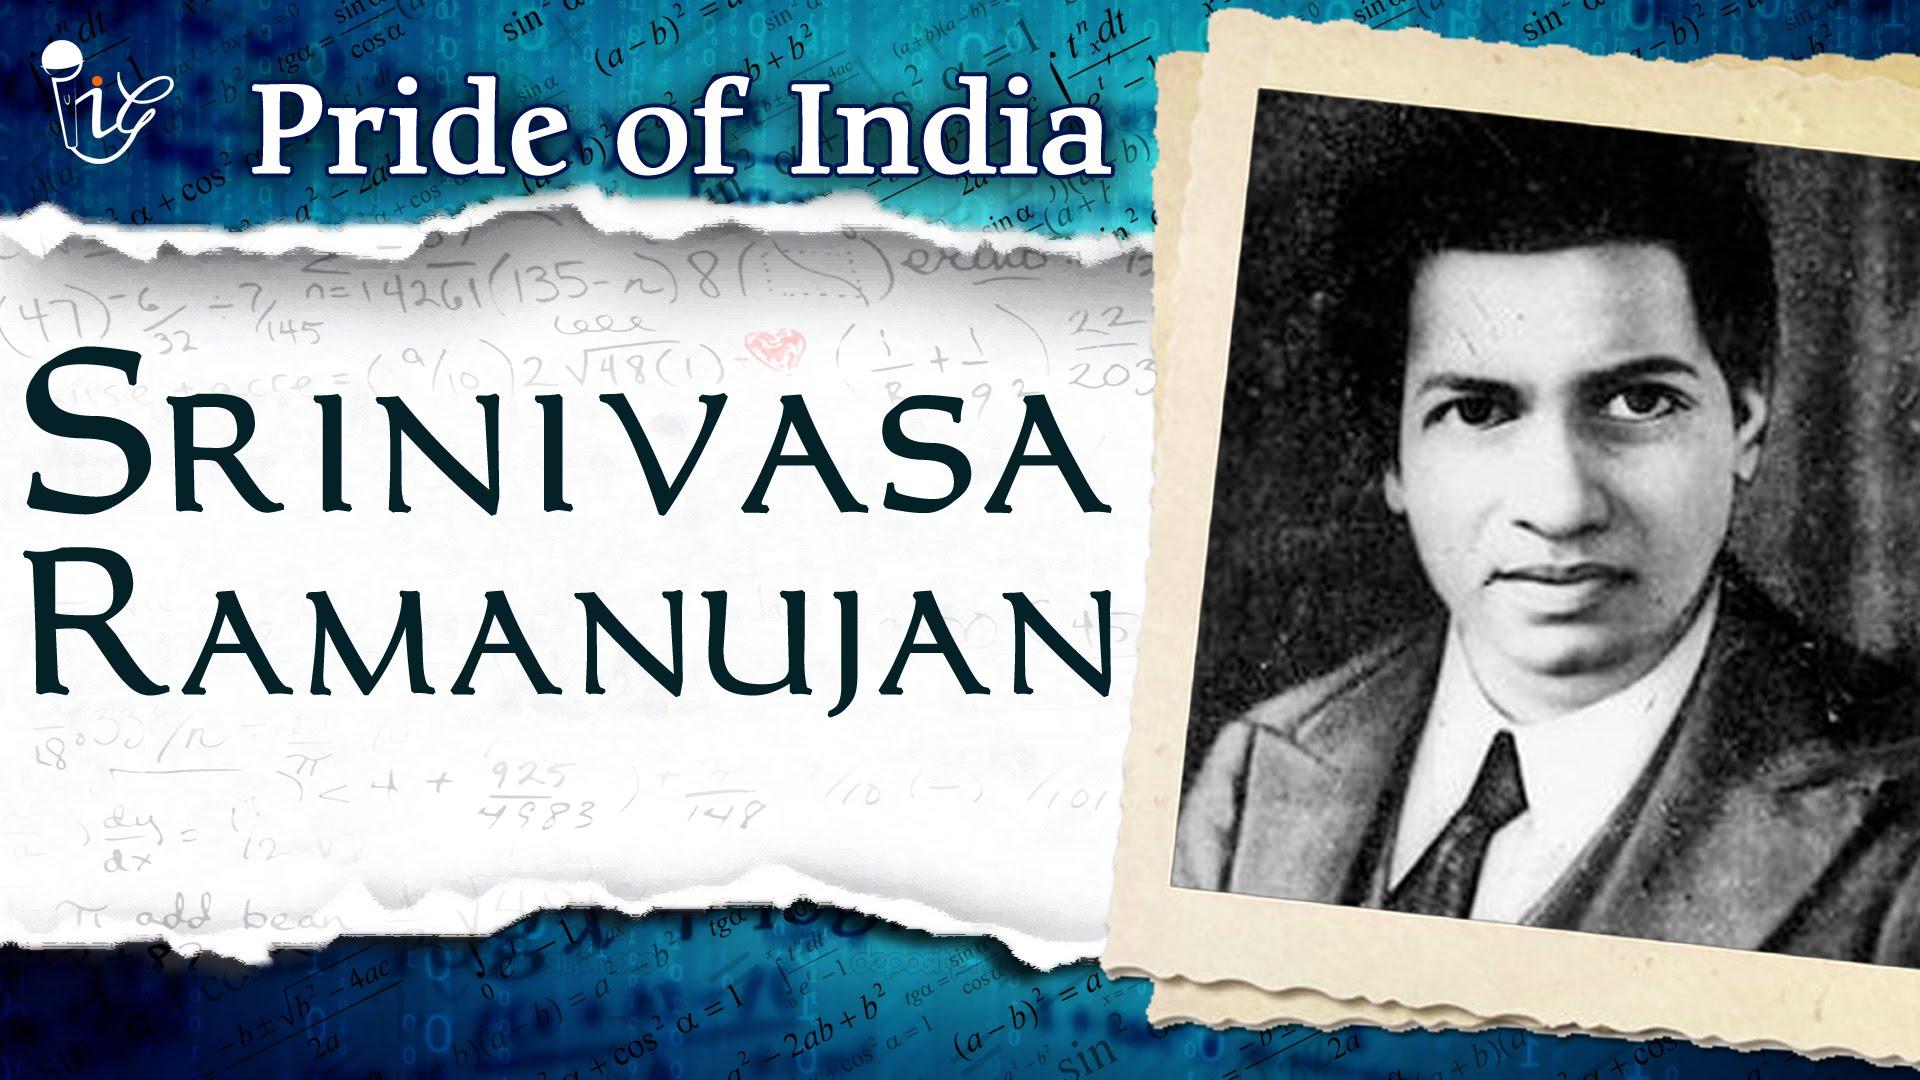 WELCOME TO THE EXCITING WORLD OF MATHEMATICS Celebrating the birth  anniversary and legacy of Srinivasa Ramanujan on National Mathematics Day  2020